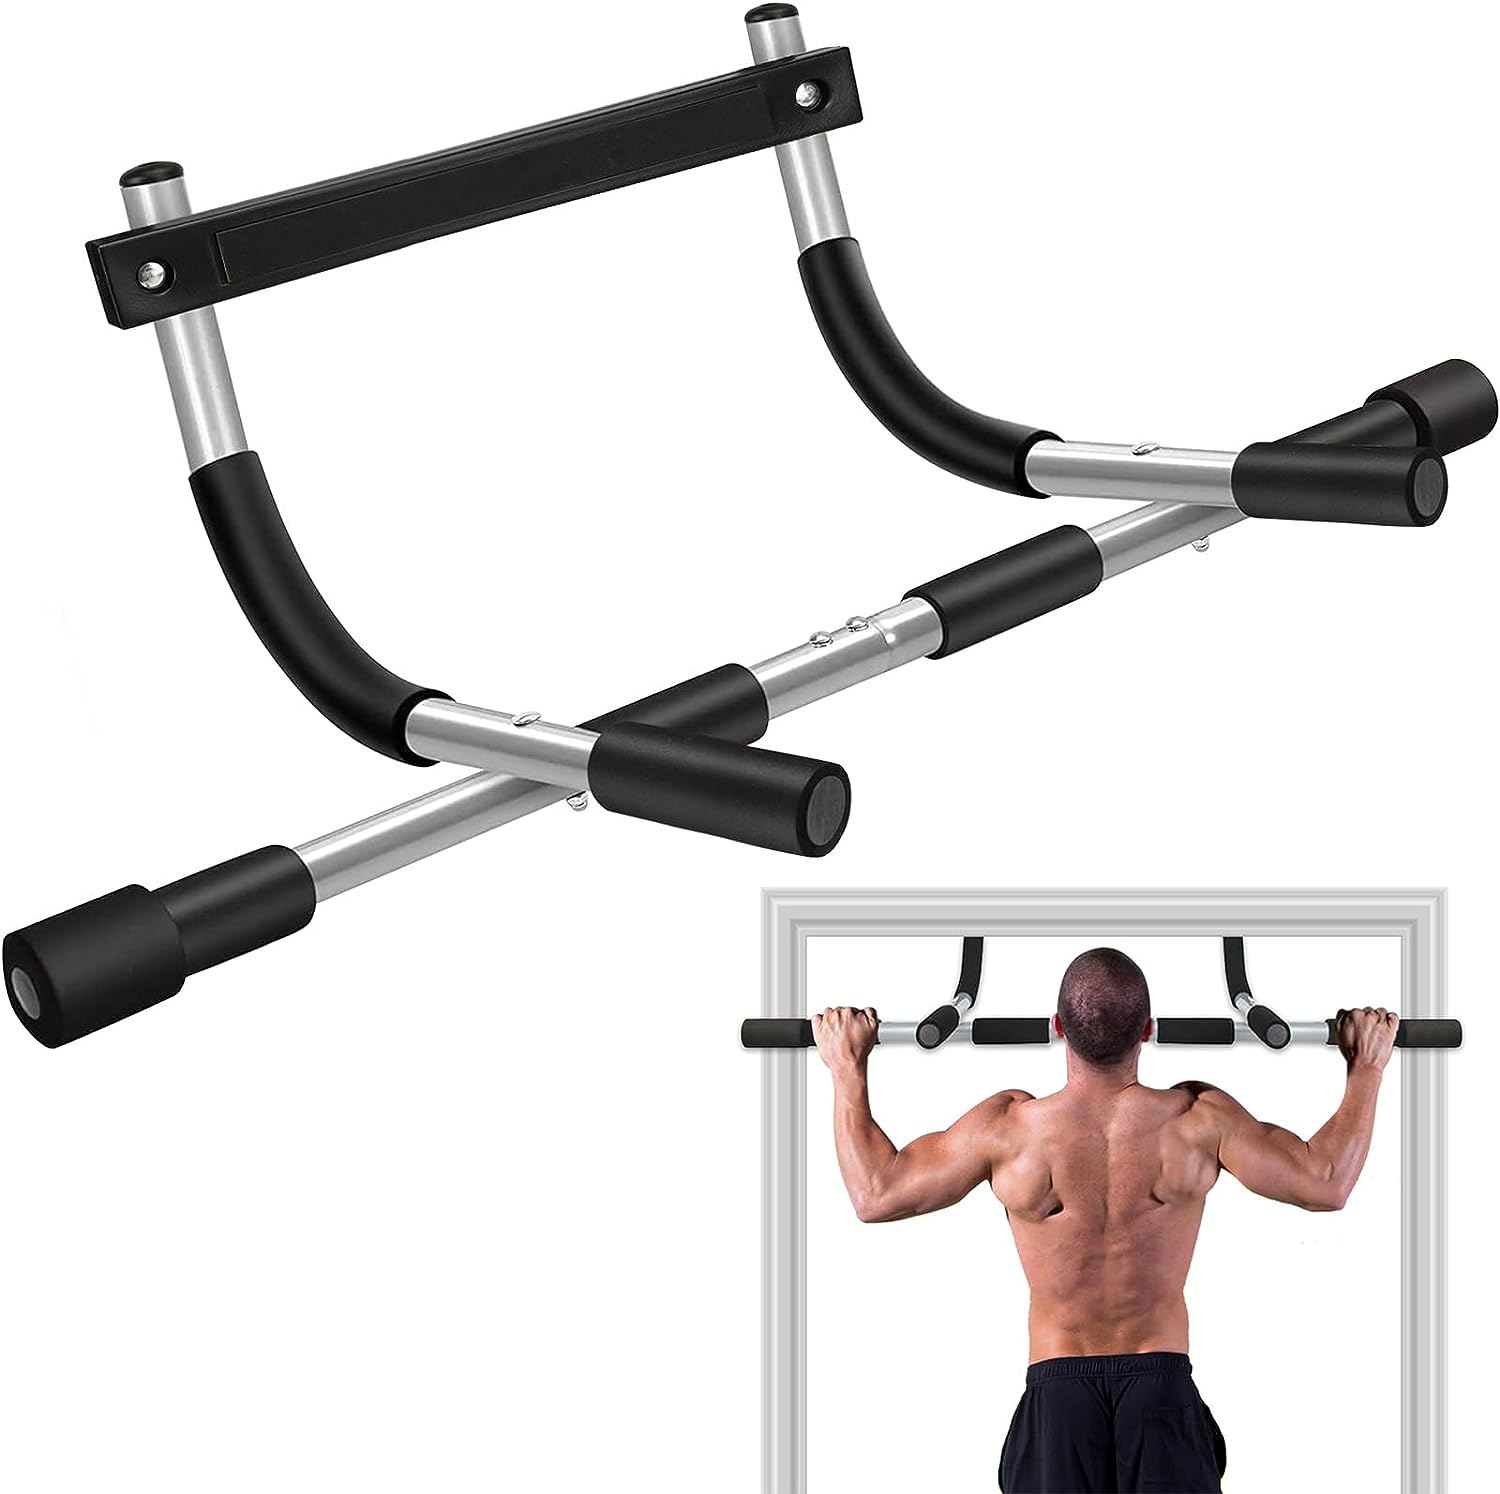  Ally Peaks Pull Up Bar for Doorway | Thickened Steel Max Limit 440 lbs Upper Body Fitness Workout Bar| Multi-Grip Strength for Doorway | Indoor Chin-Up Bar Fitness Trainer for Home Gym Portable 